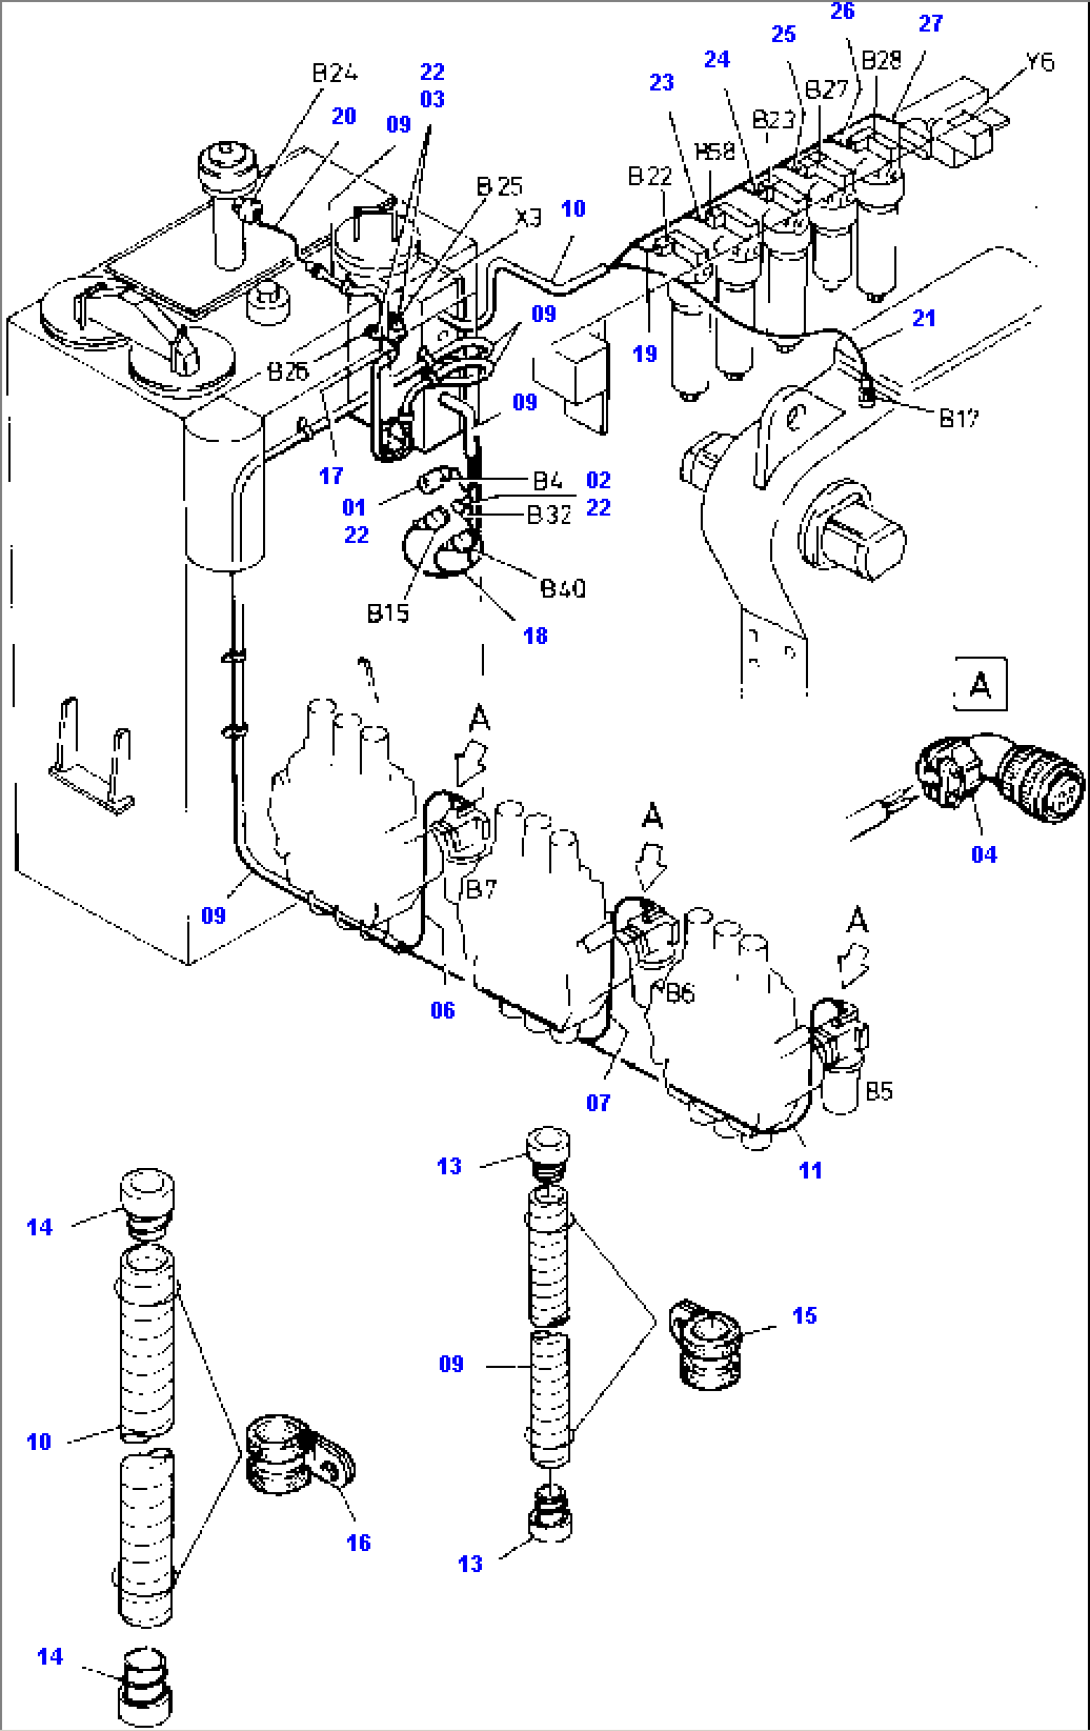 Wire Layout - Oil Tank